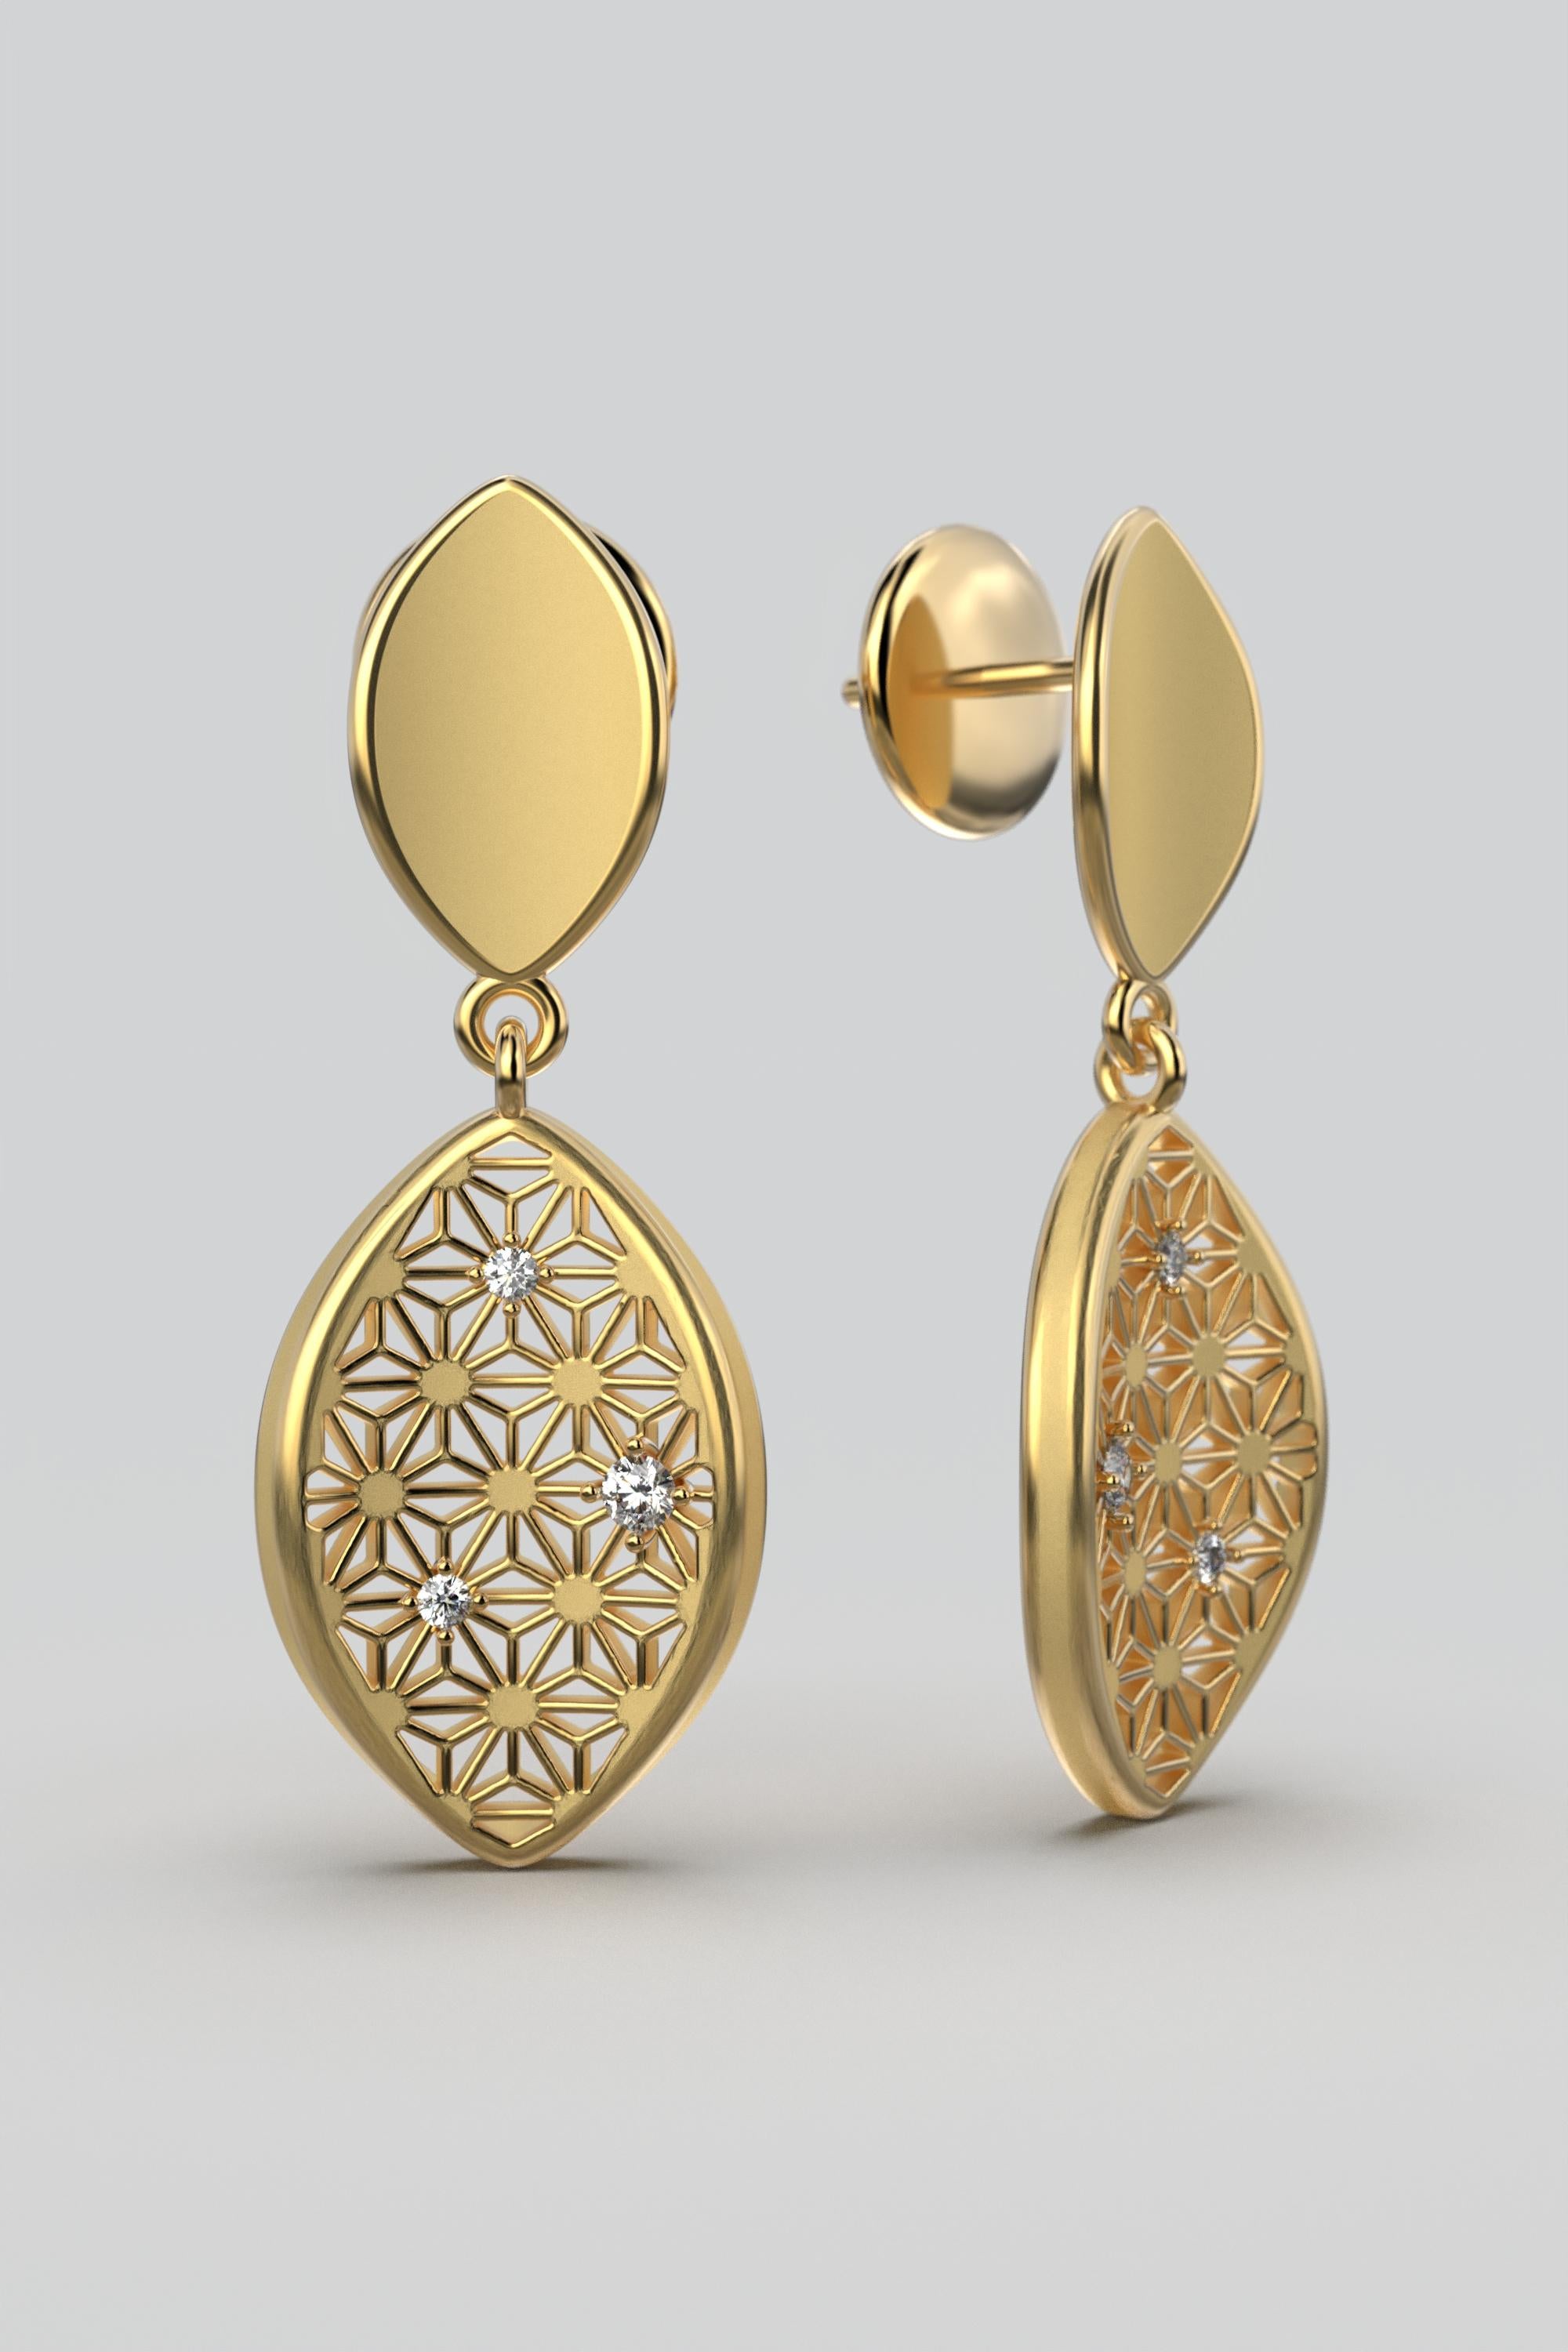 Discover exquisite Italian Gold Diamond Earrings made in Italy. Our collection features stunning Natural Diamond Earrings, adorned with Sashiko Japanese Pattern for a unique touch. Explore our curated selection of Dangle Drop Earrings, meticulously